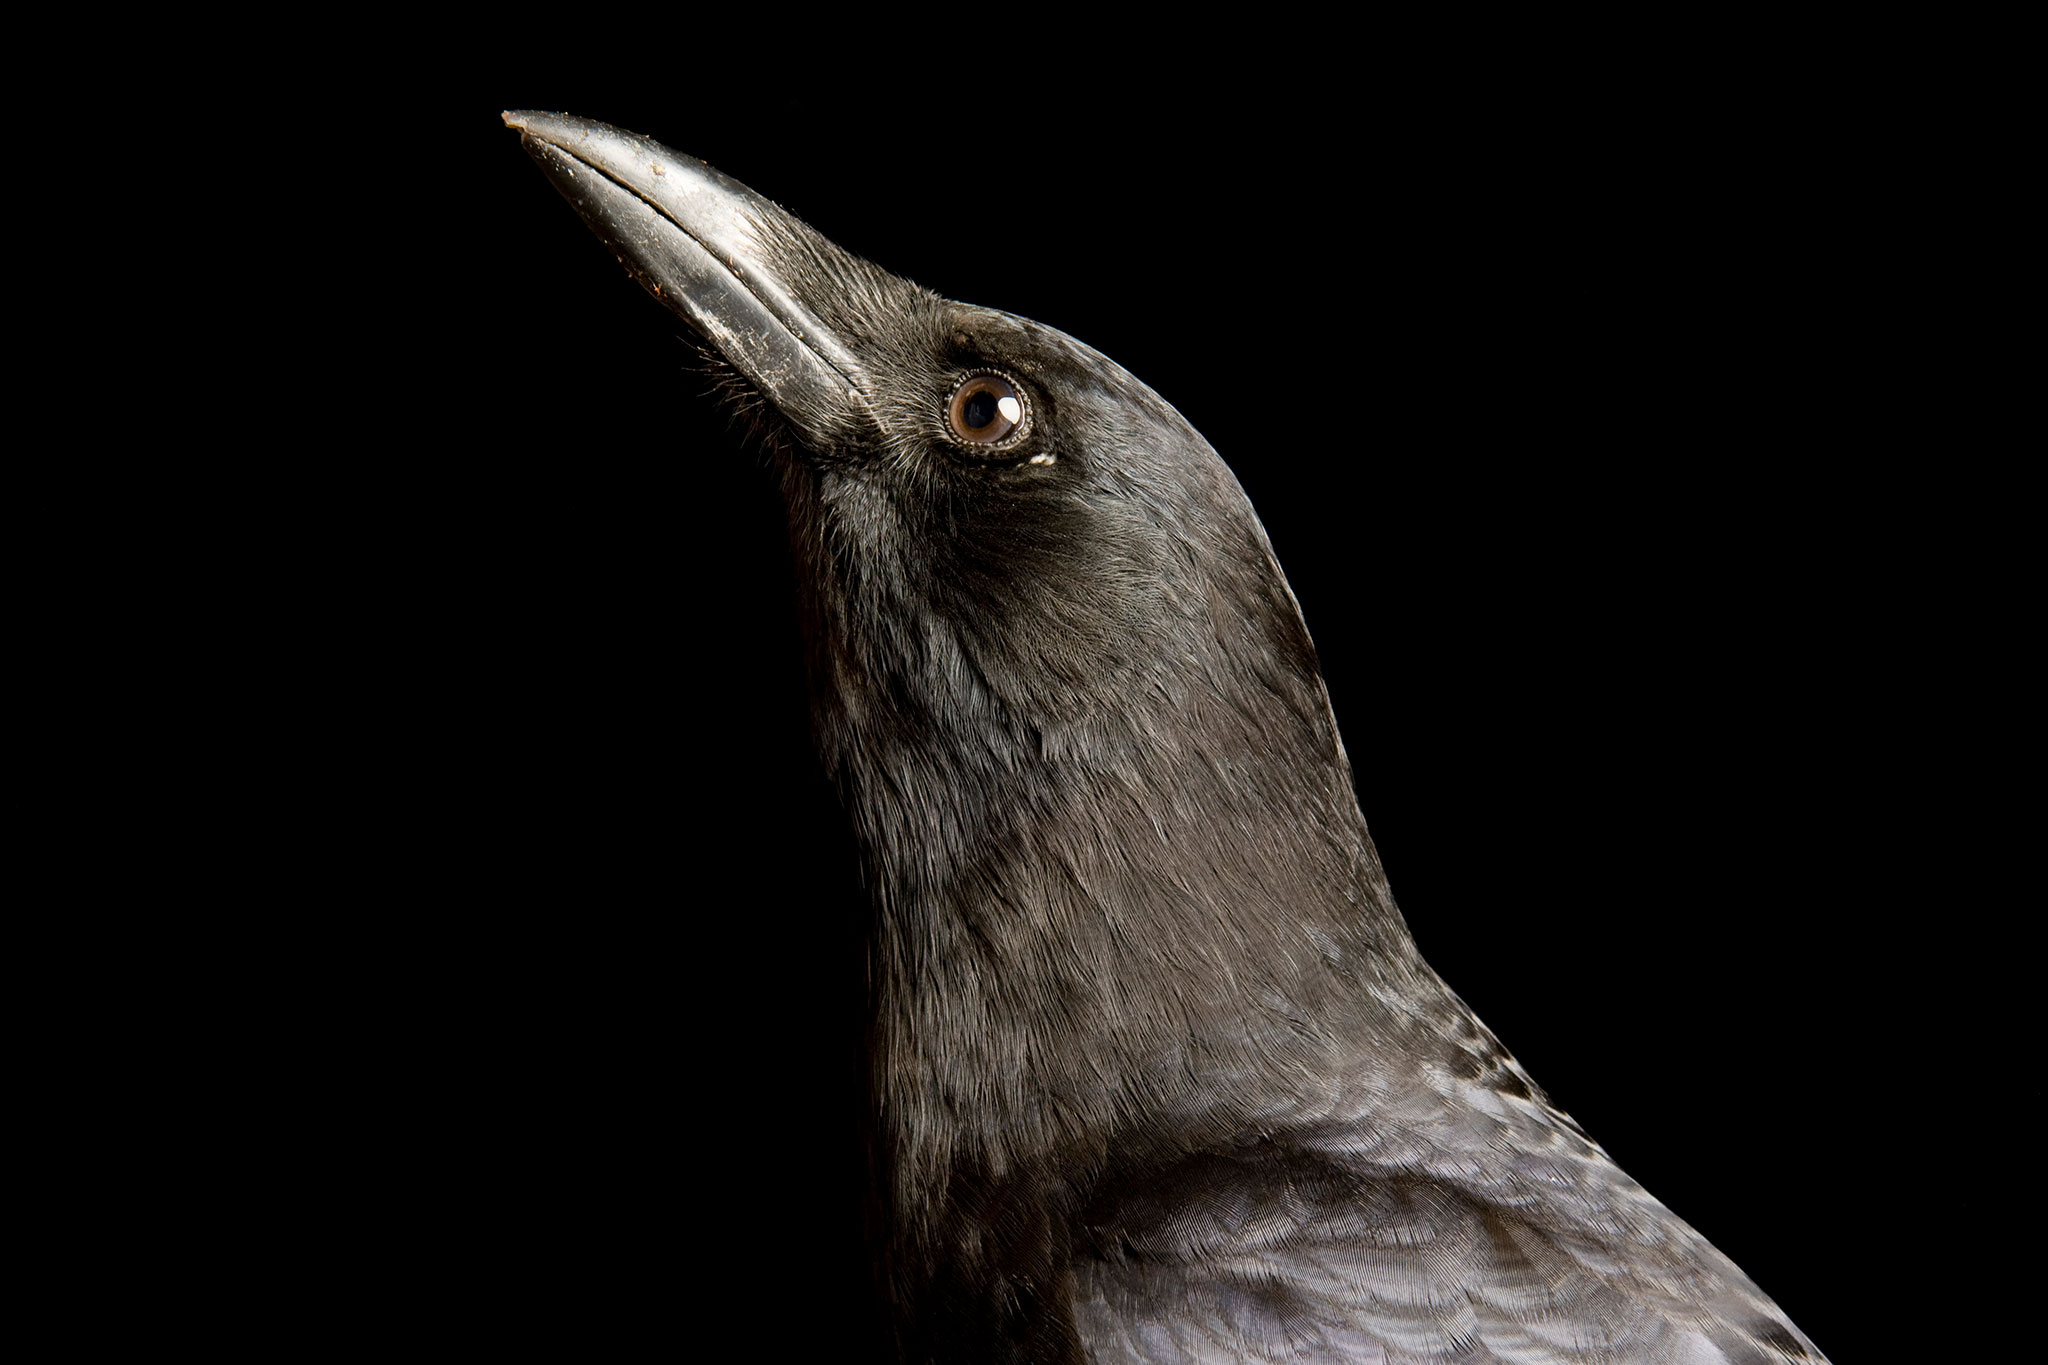 Ravens, Crows, Parrots, and More—Meet the Most Intelligent Birds